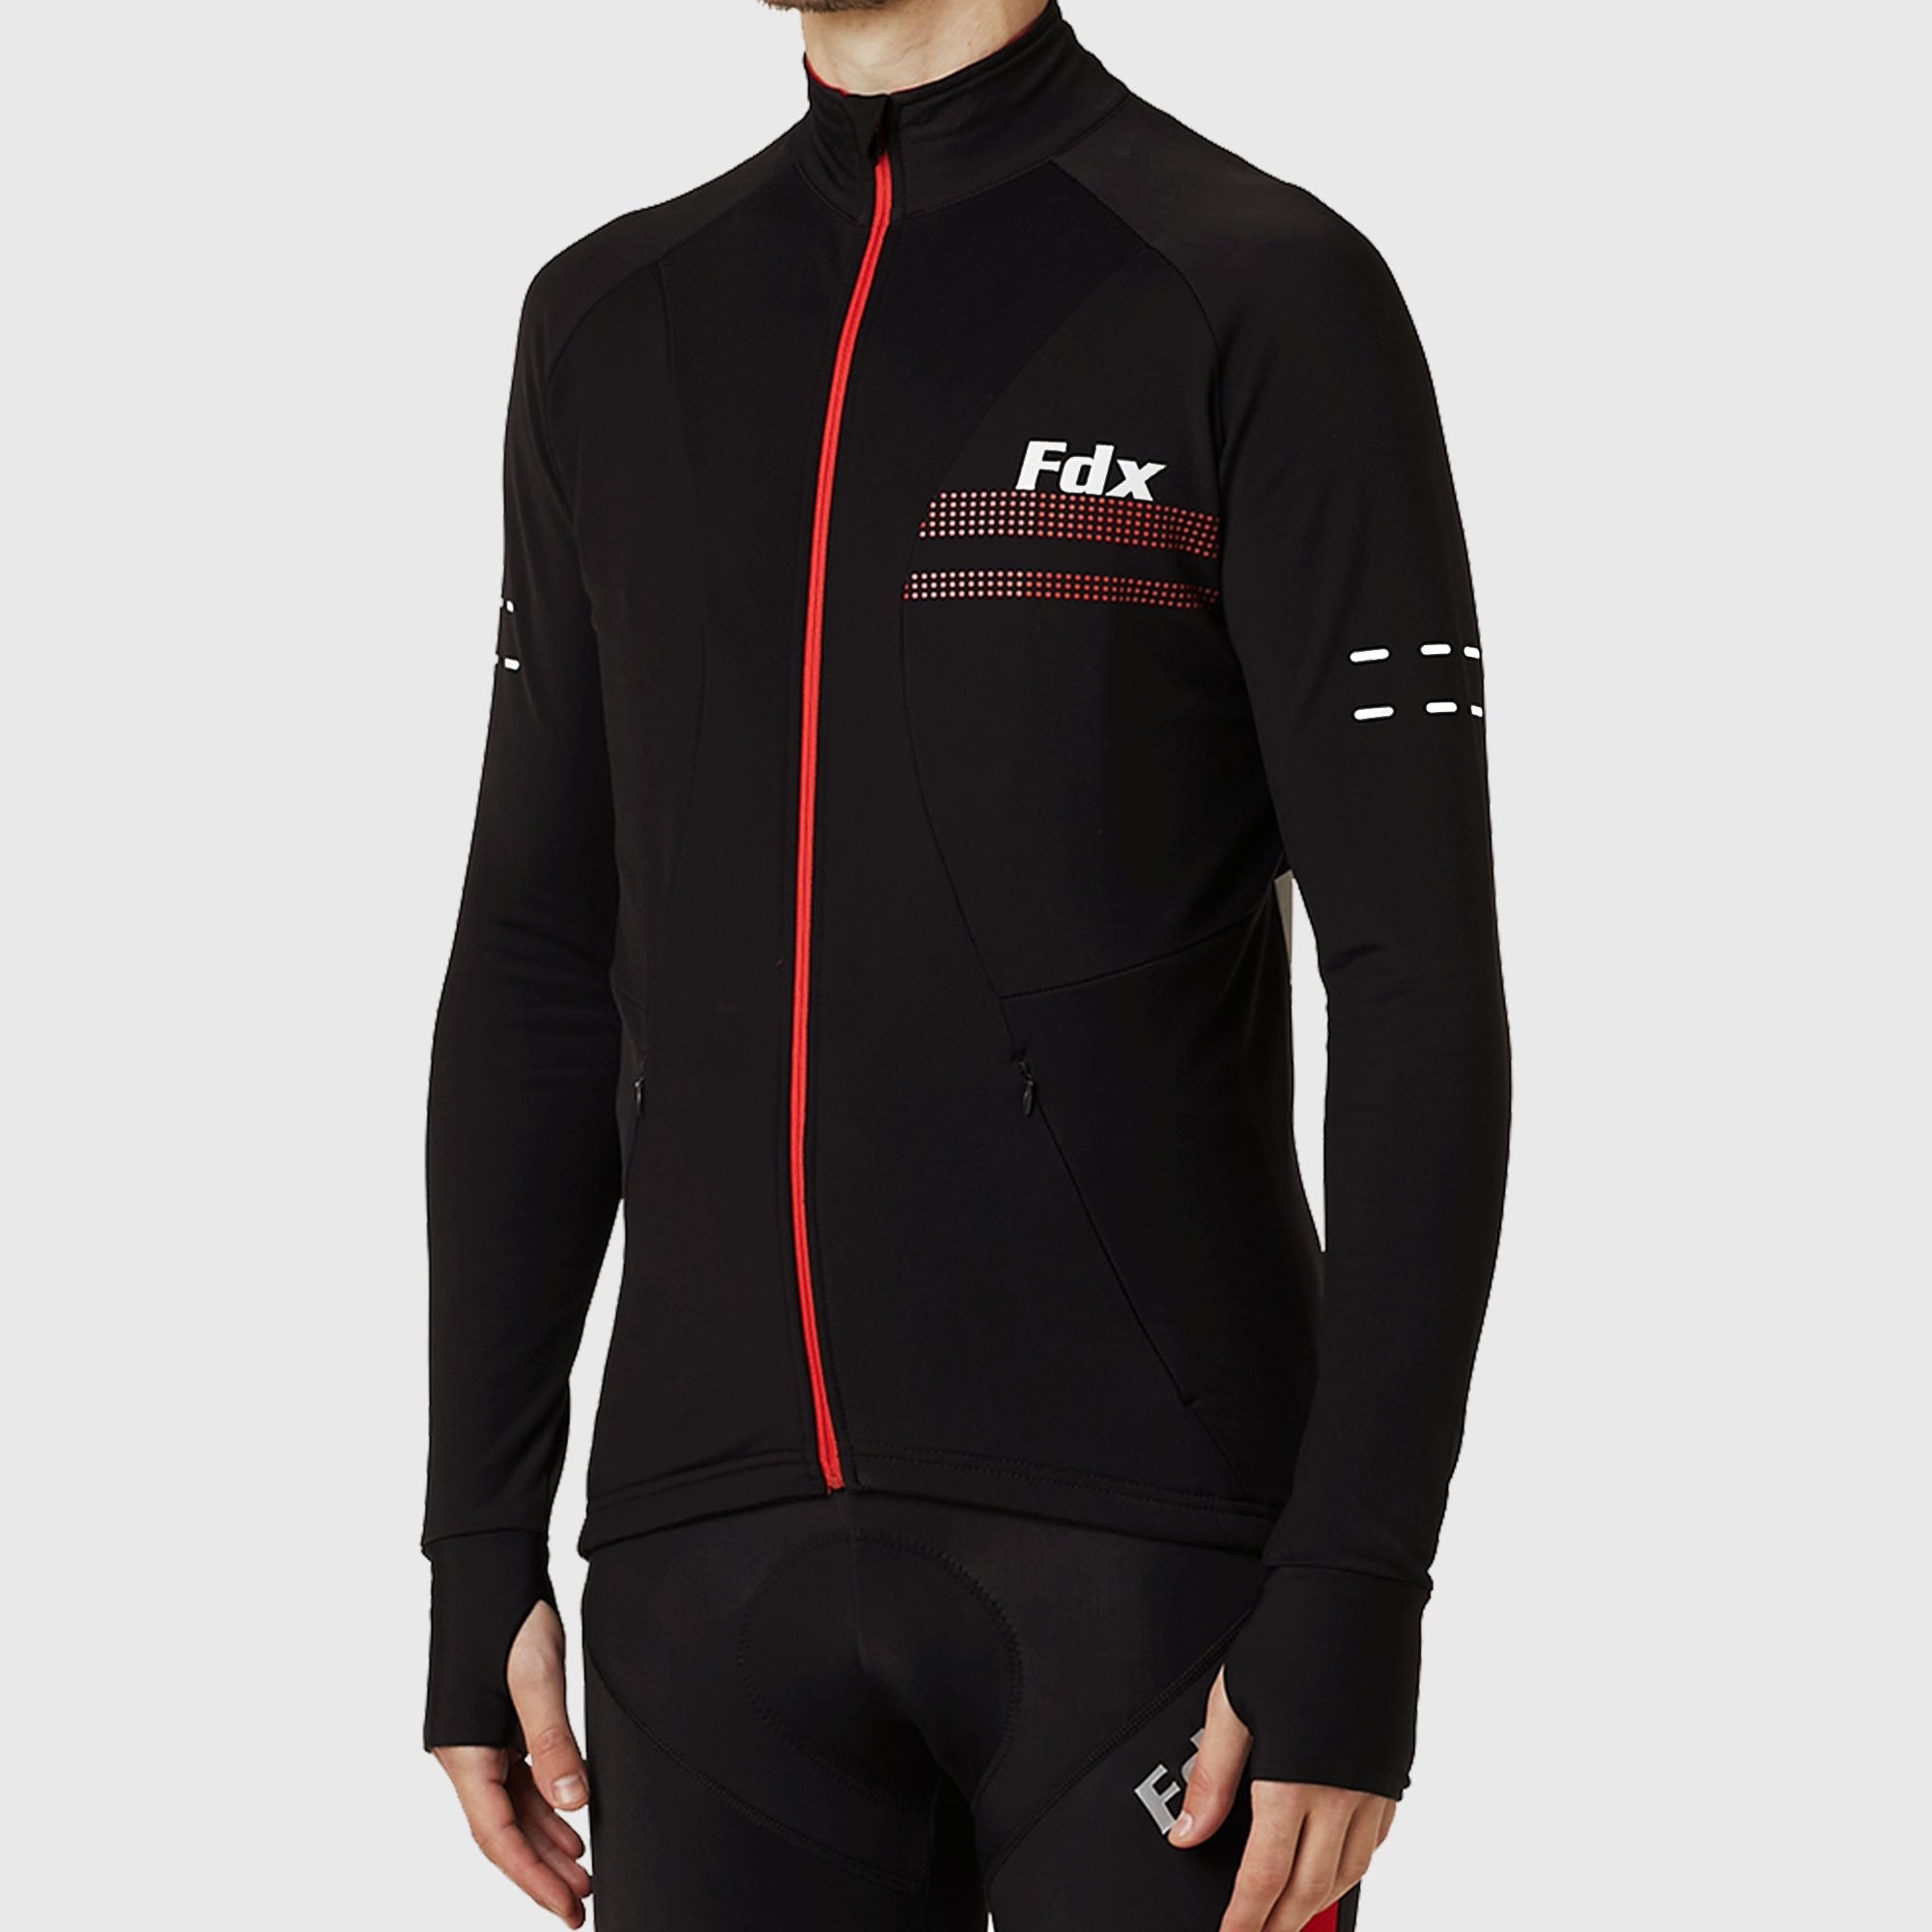 Fdx Arch Men's Red Thermal Long Sleeve Cycling Jersey